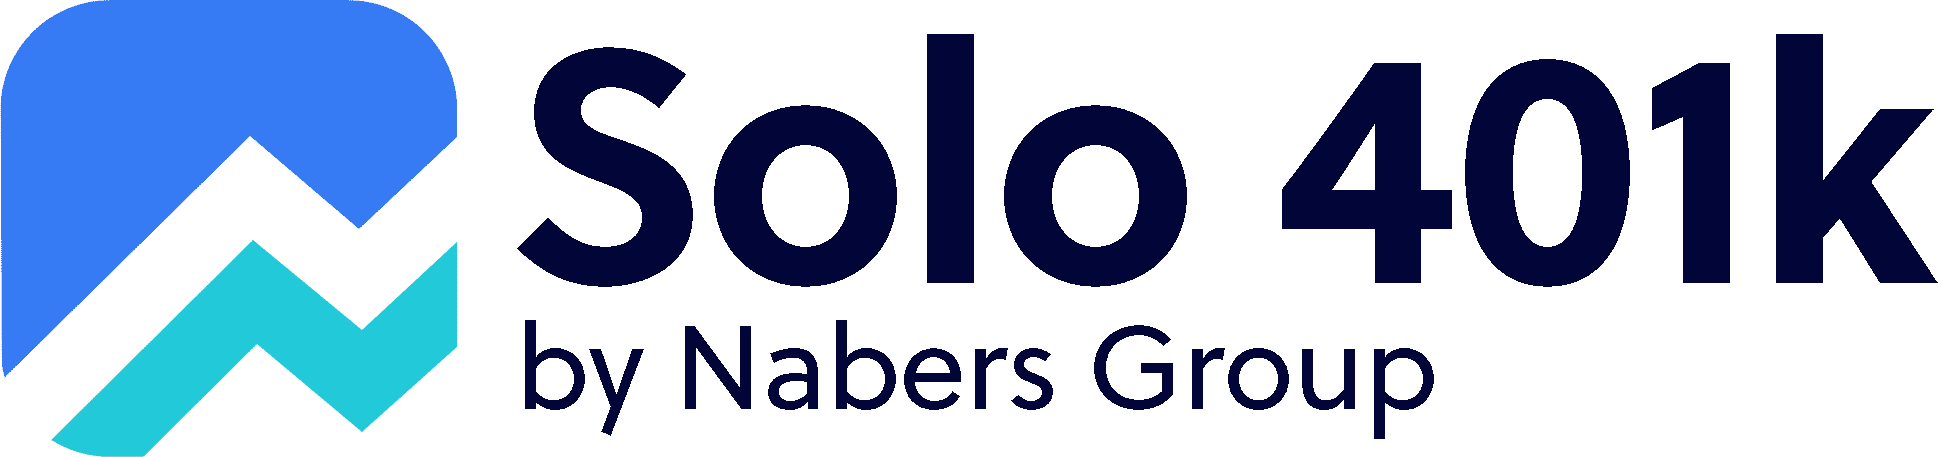 comparing solo 401k providers: nabers group